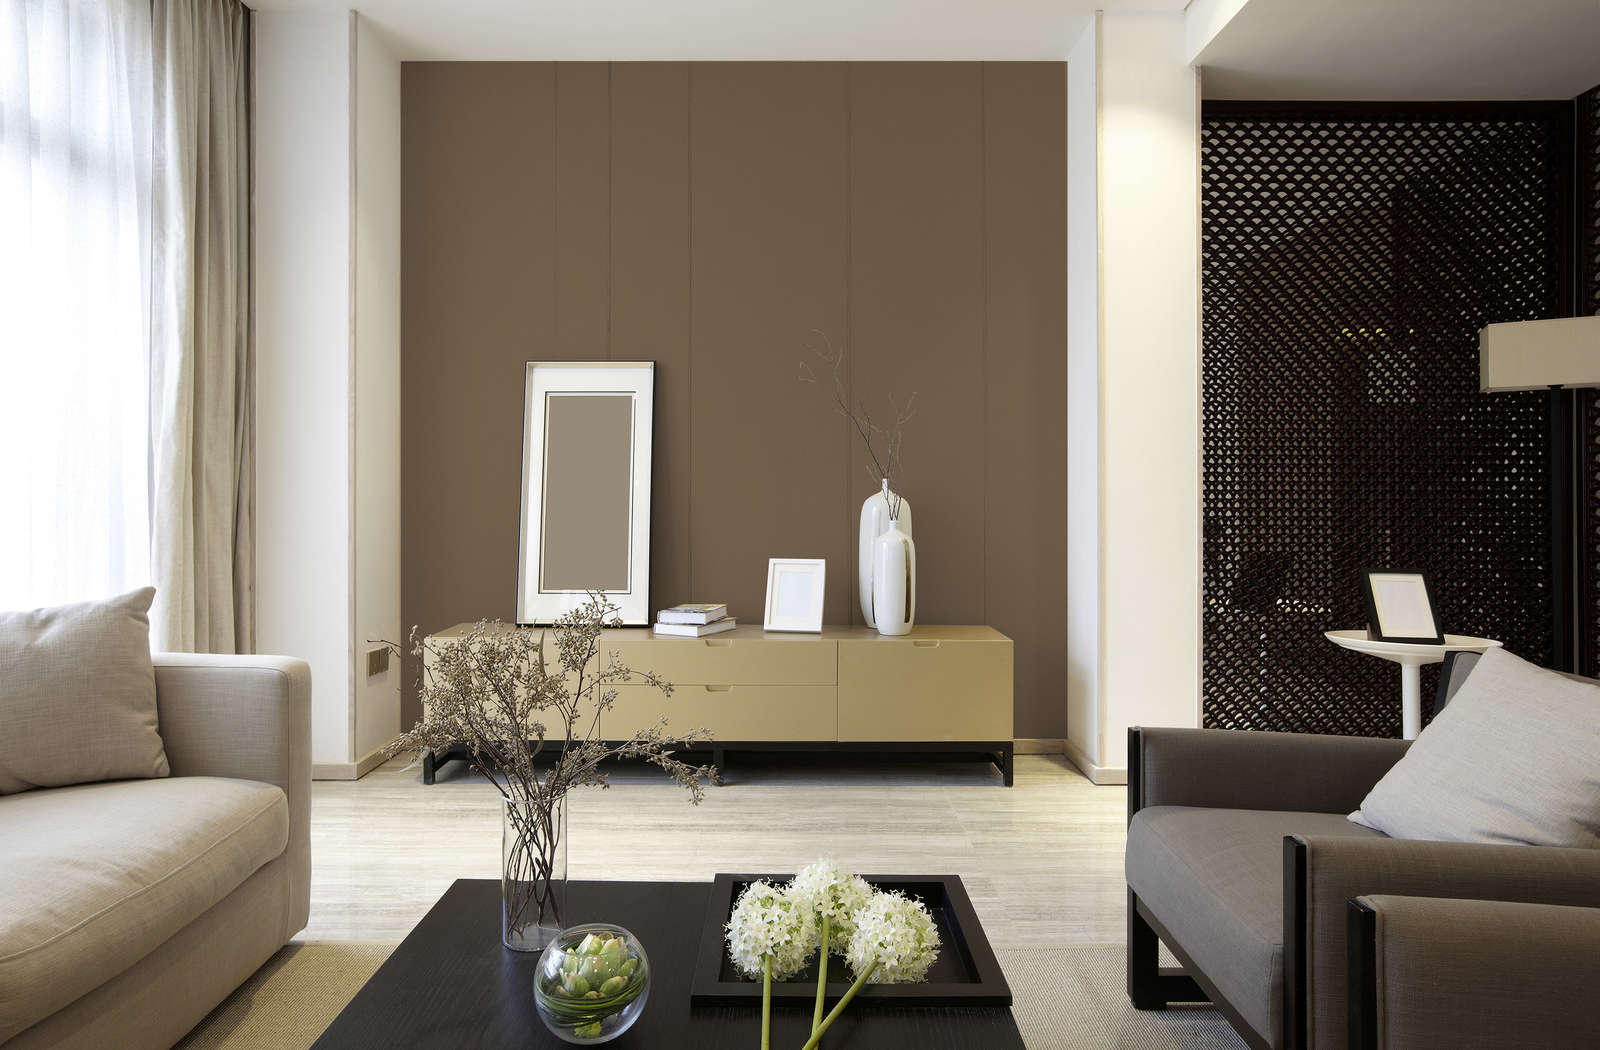             Premium Wall Paint Soothing Brown »Essential Earth« NW711 – 1 litre
        